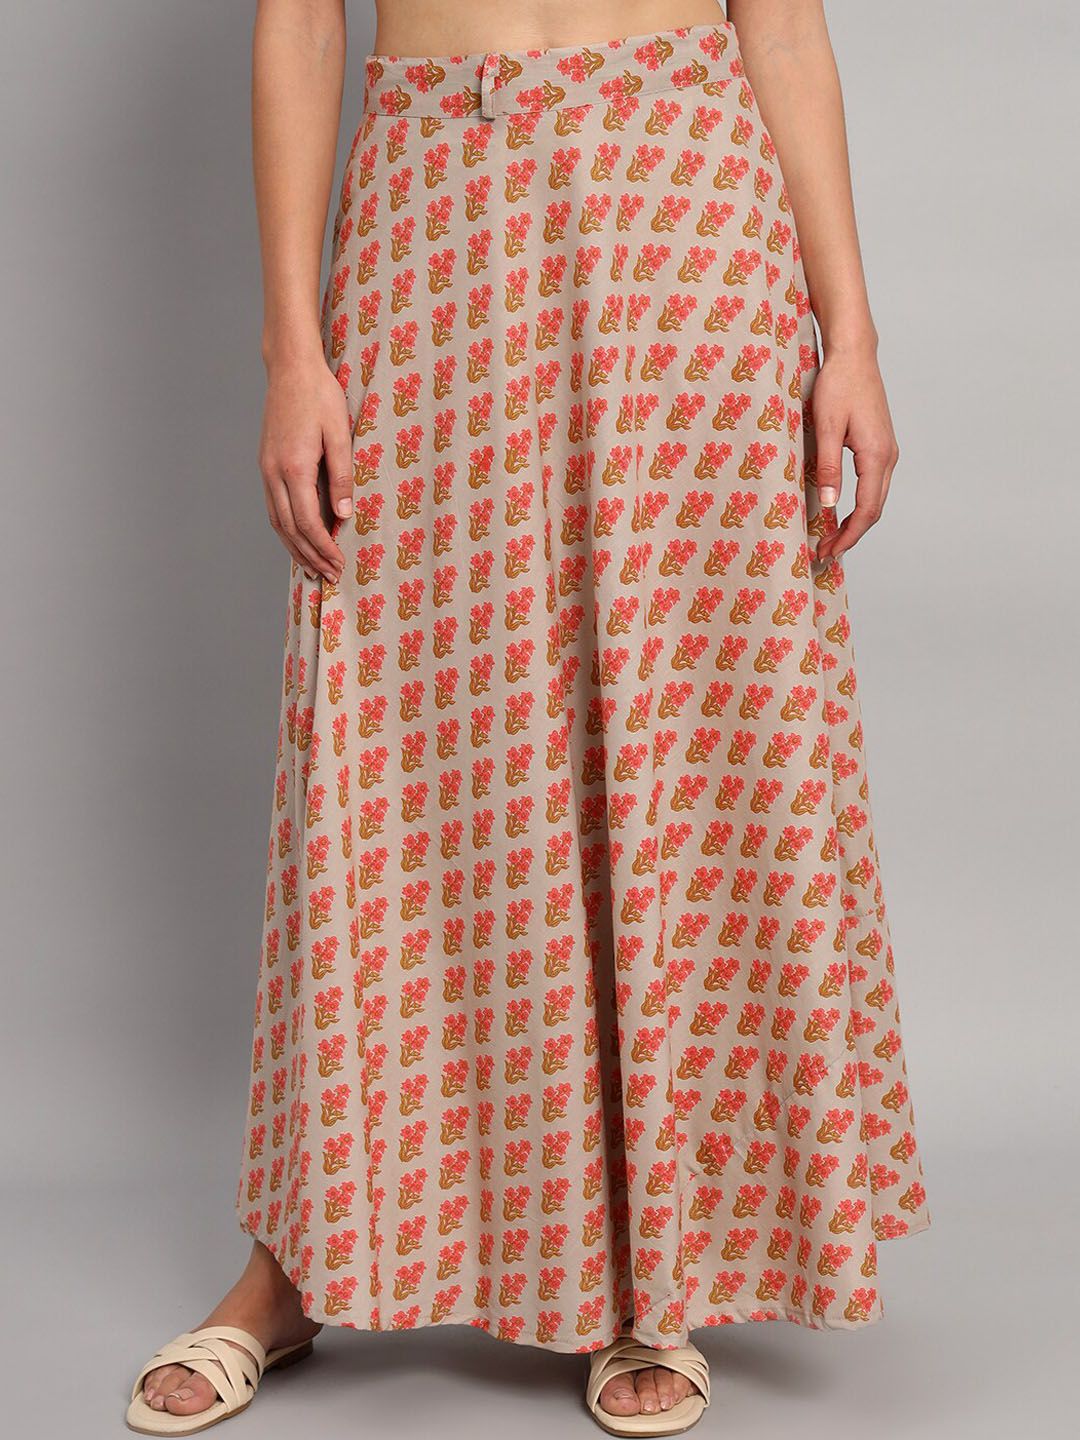 HANDICRAFT PALACE Printed Pure Cotton Wrap Maxi Skirts Price in India